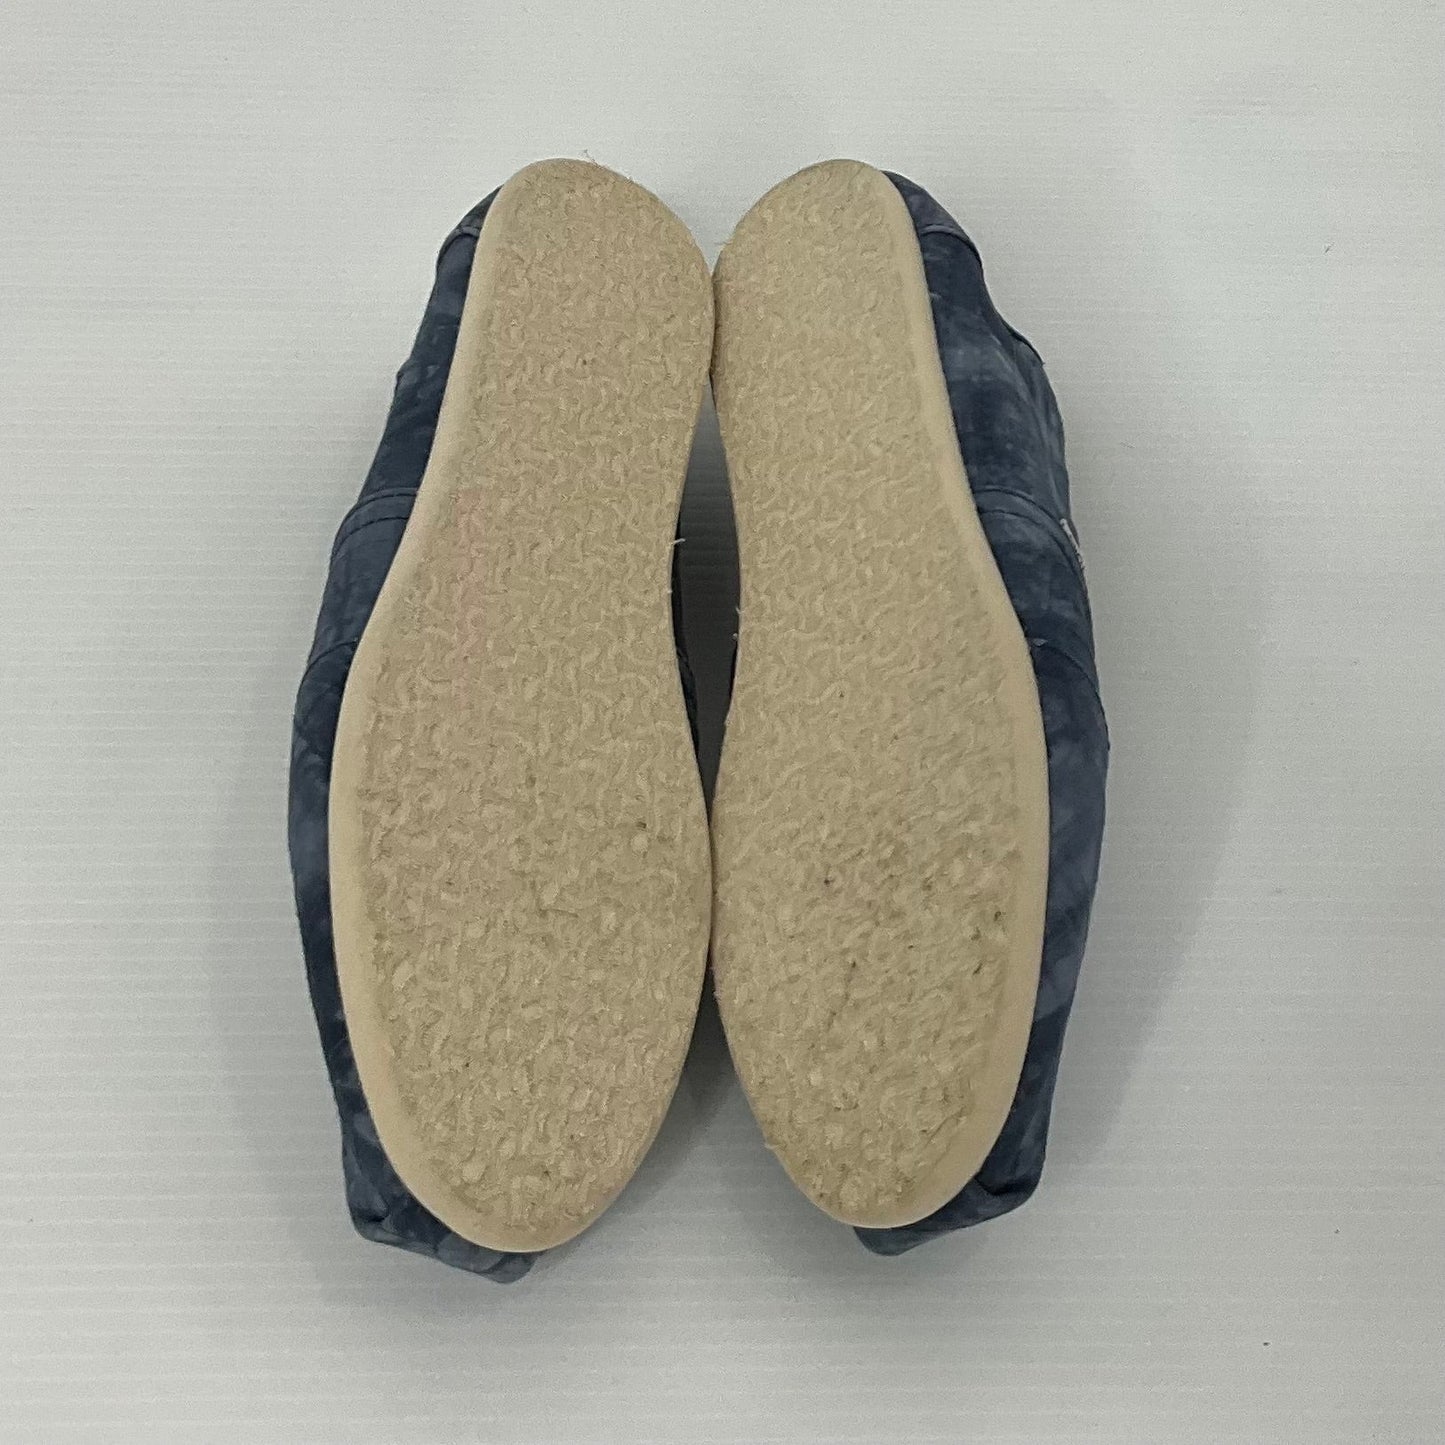 Navy Shoes Flats Toms, Size 7.5